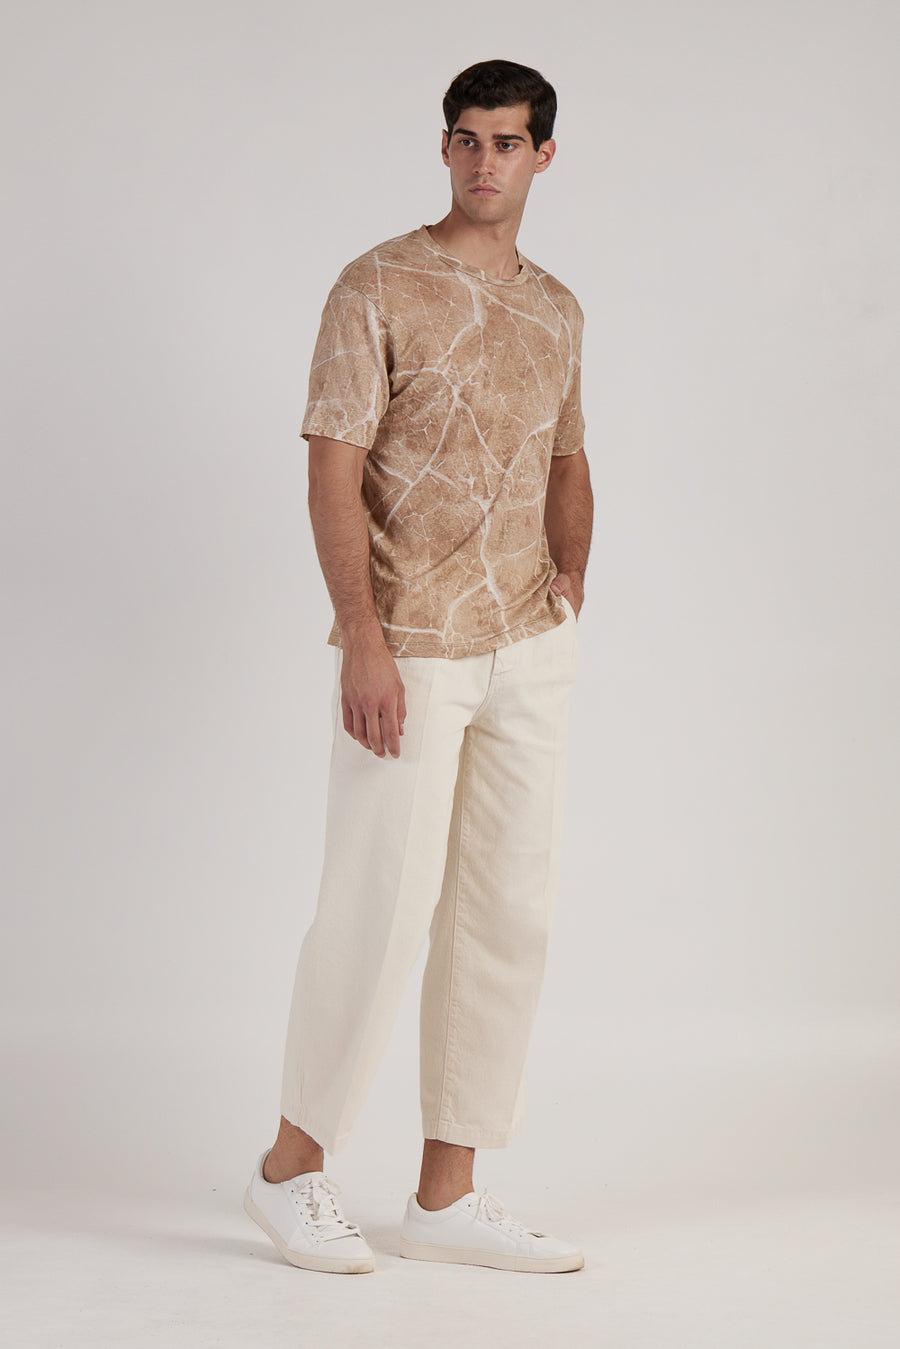 Buy the Daniele Fiesoli Cracking Earth Print Linen T-Shirt in Sand at Intro. Spend £50 for free UK delivery. Official stockists. We ship worldwide.